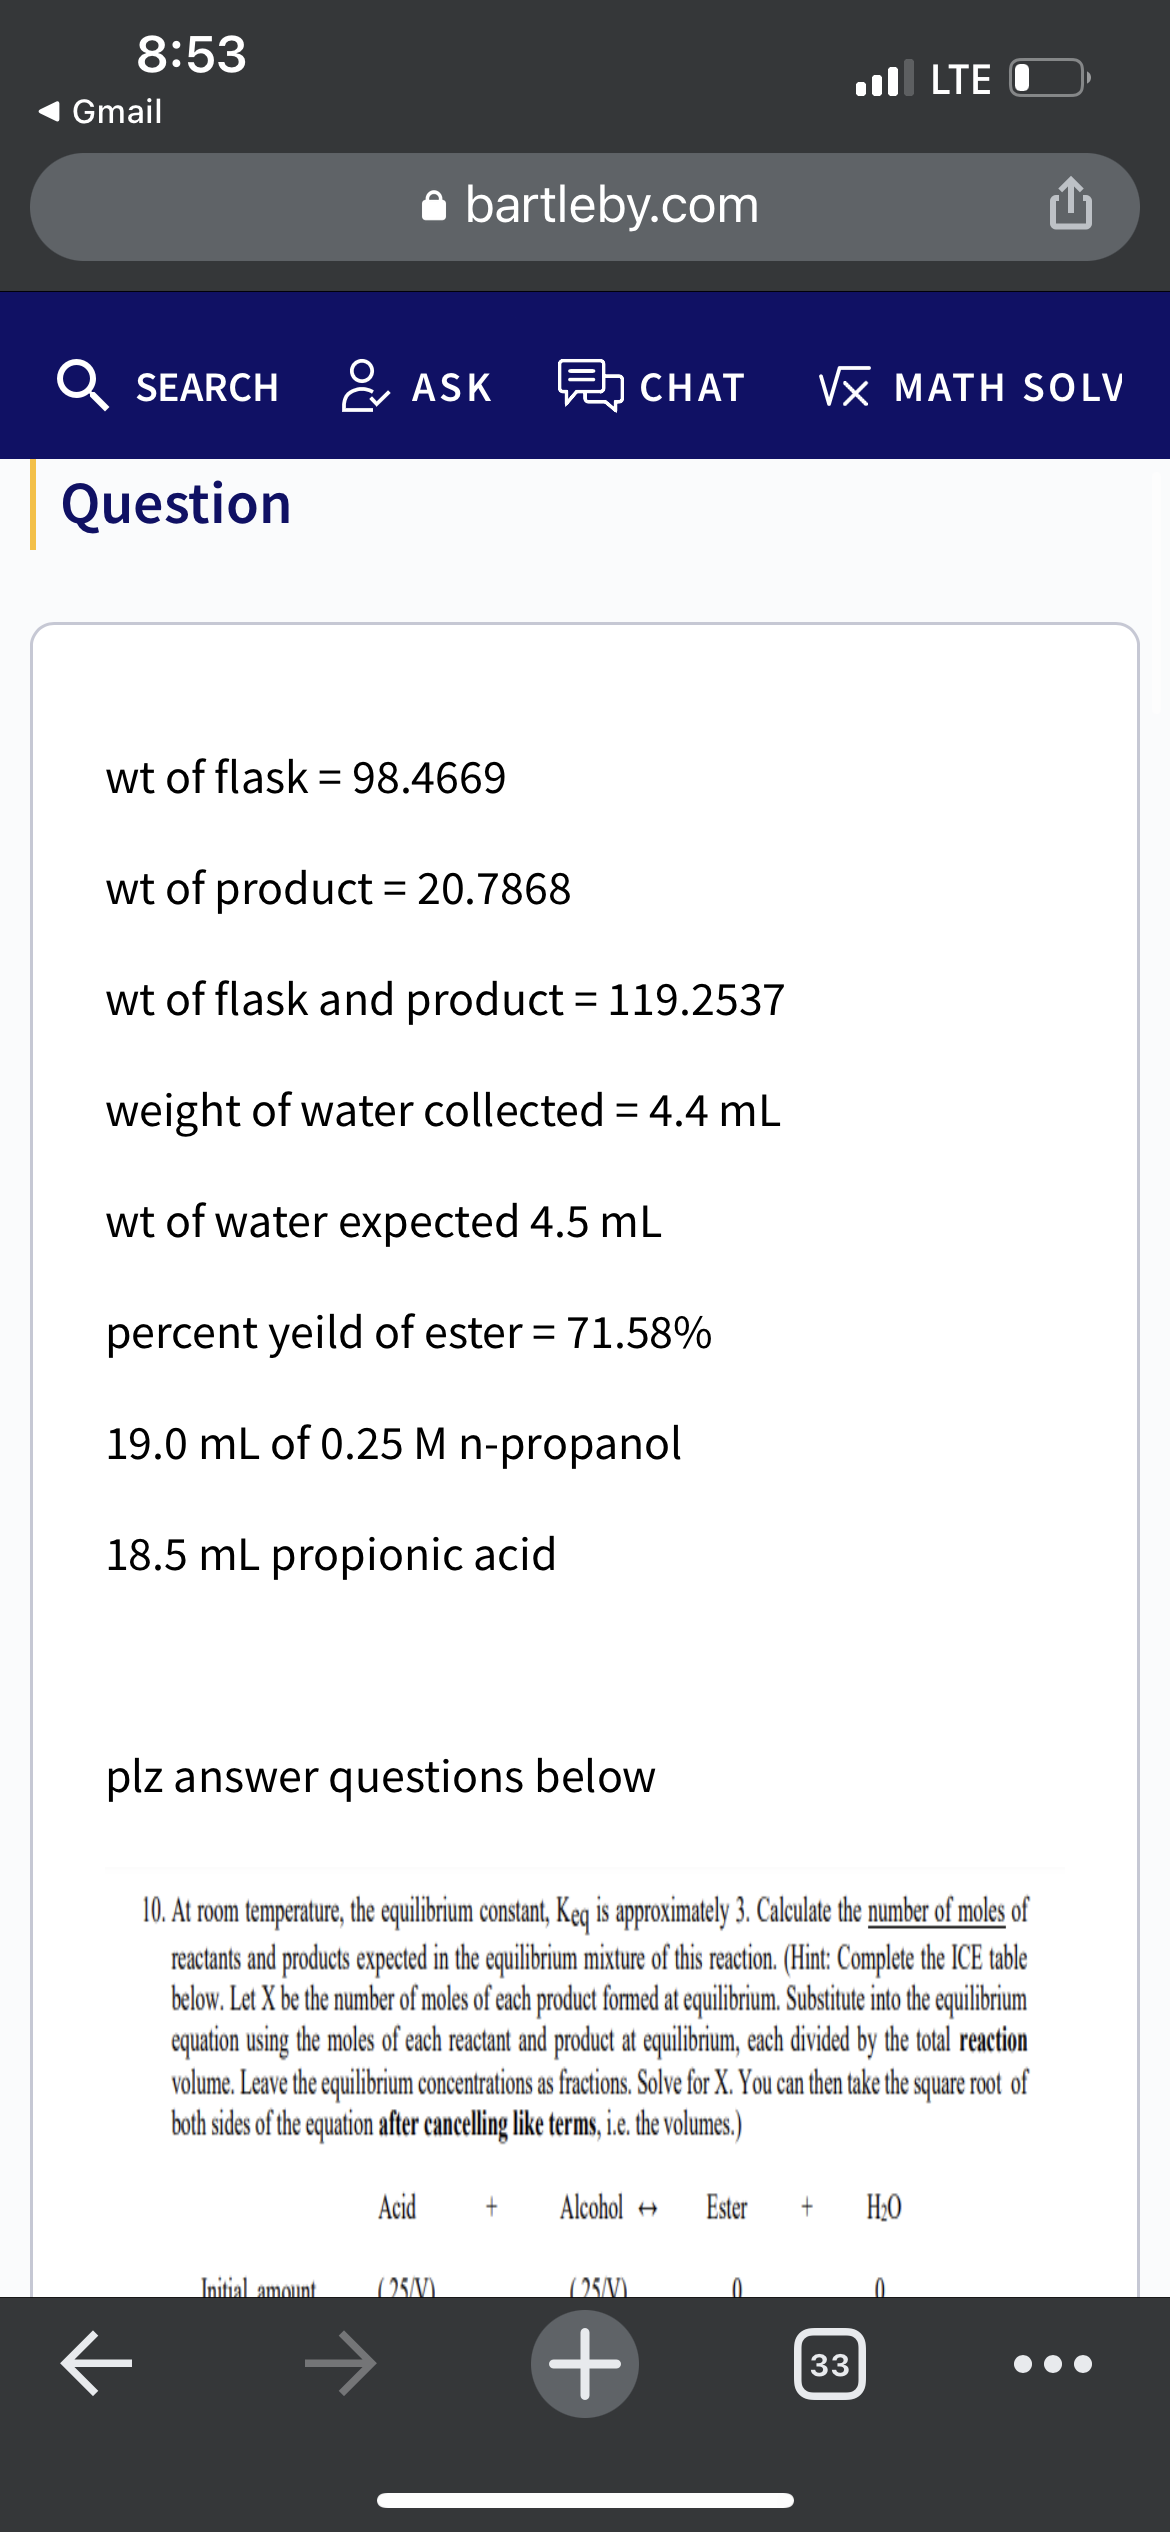 8:53
l LTE
Gmail
a bartleby.com
SEARCH ASK
h CHAT
VX MATH SOLV
Question
wt of flask = 98.4669
wt of product = 20.7868
wt of flask and product = 119.2537
weight of water collected = 4,4 mL
wt of water expected 4.5 mL
percent yeild of ester = 71.58%
%3D
19.0 mL of 0.25 M n-propanol
18.5 mL propionic acid
plz answer questions below
10. At room temperature, the equilibrium constant, Keq is approximately 3. Calculate the number of moles of
reactants and products expected in the equilibrium mixture of this reaction. (Hint: Complete the ICE table
below. Let X be the number of moles of each product fomed t equilibrium. Substue ino the equilibrium
equation using the moles of each reactant and product at equilibrium, each divided by the total reaction
volume. Leave the equilibrium concentrations as fractions. Solve for X. You can then take the square root of
both sides of the equation after cancelling like terms, i. te volumes.)
Acid
Alcohol +
Ester
H;0
Initial amount
25/0).
(25/V)
33
